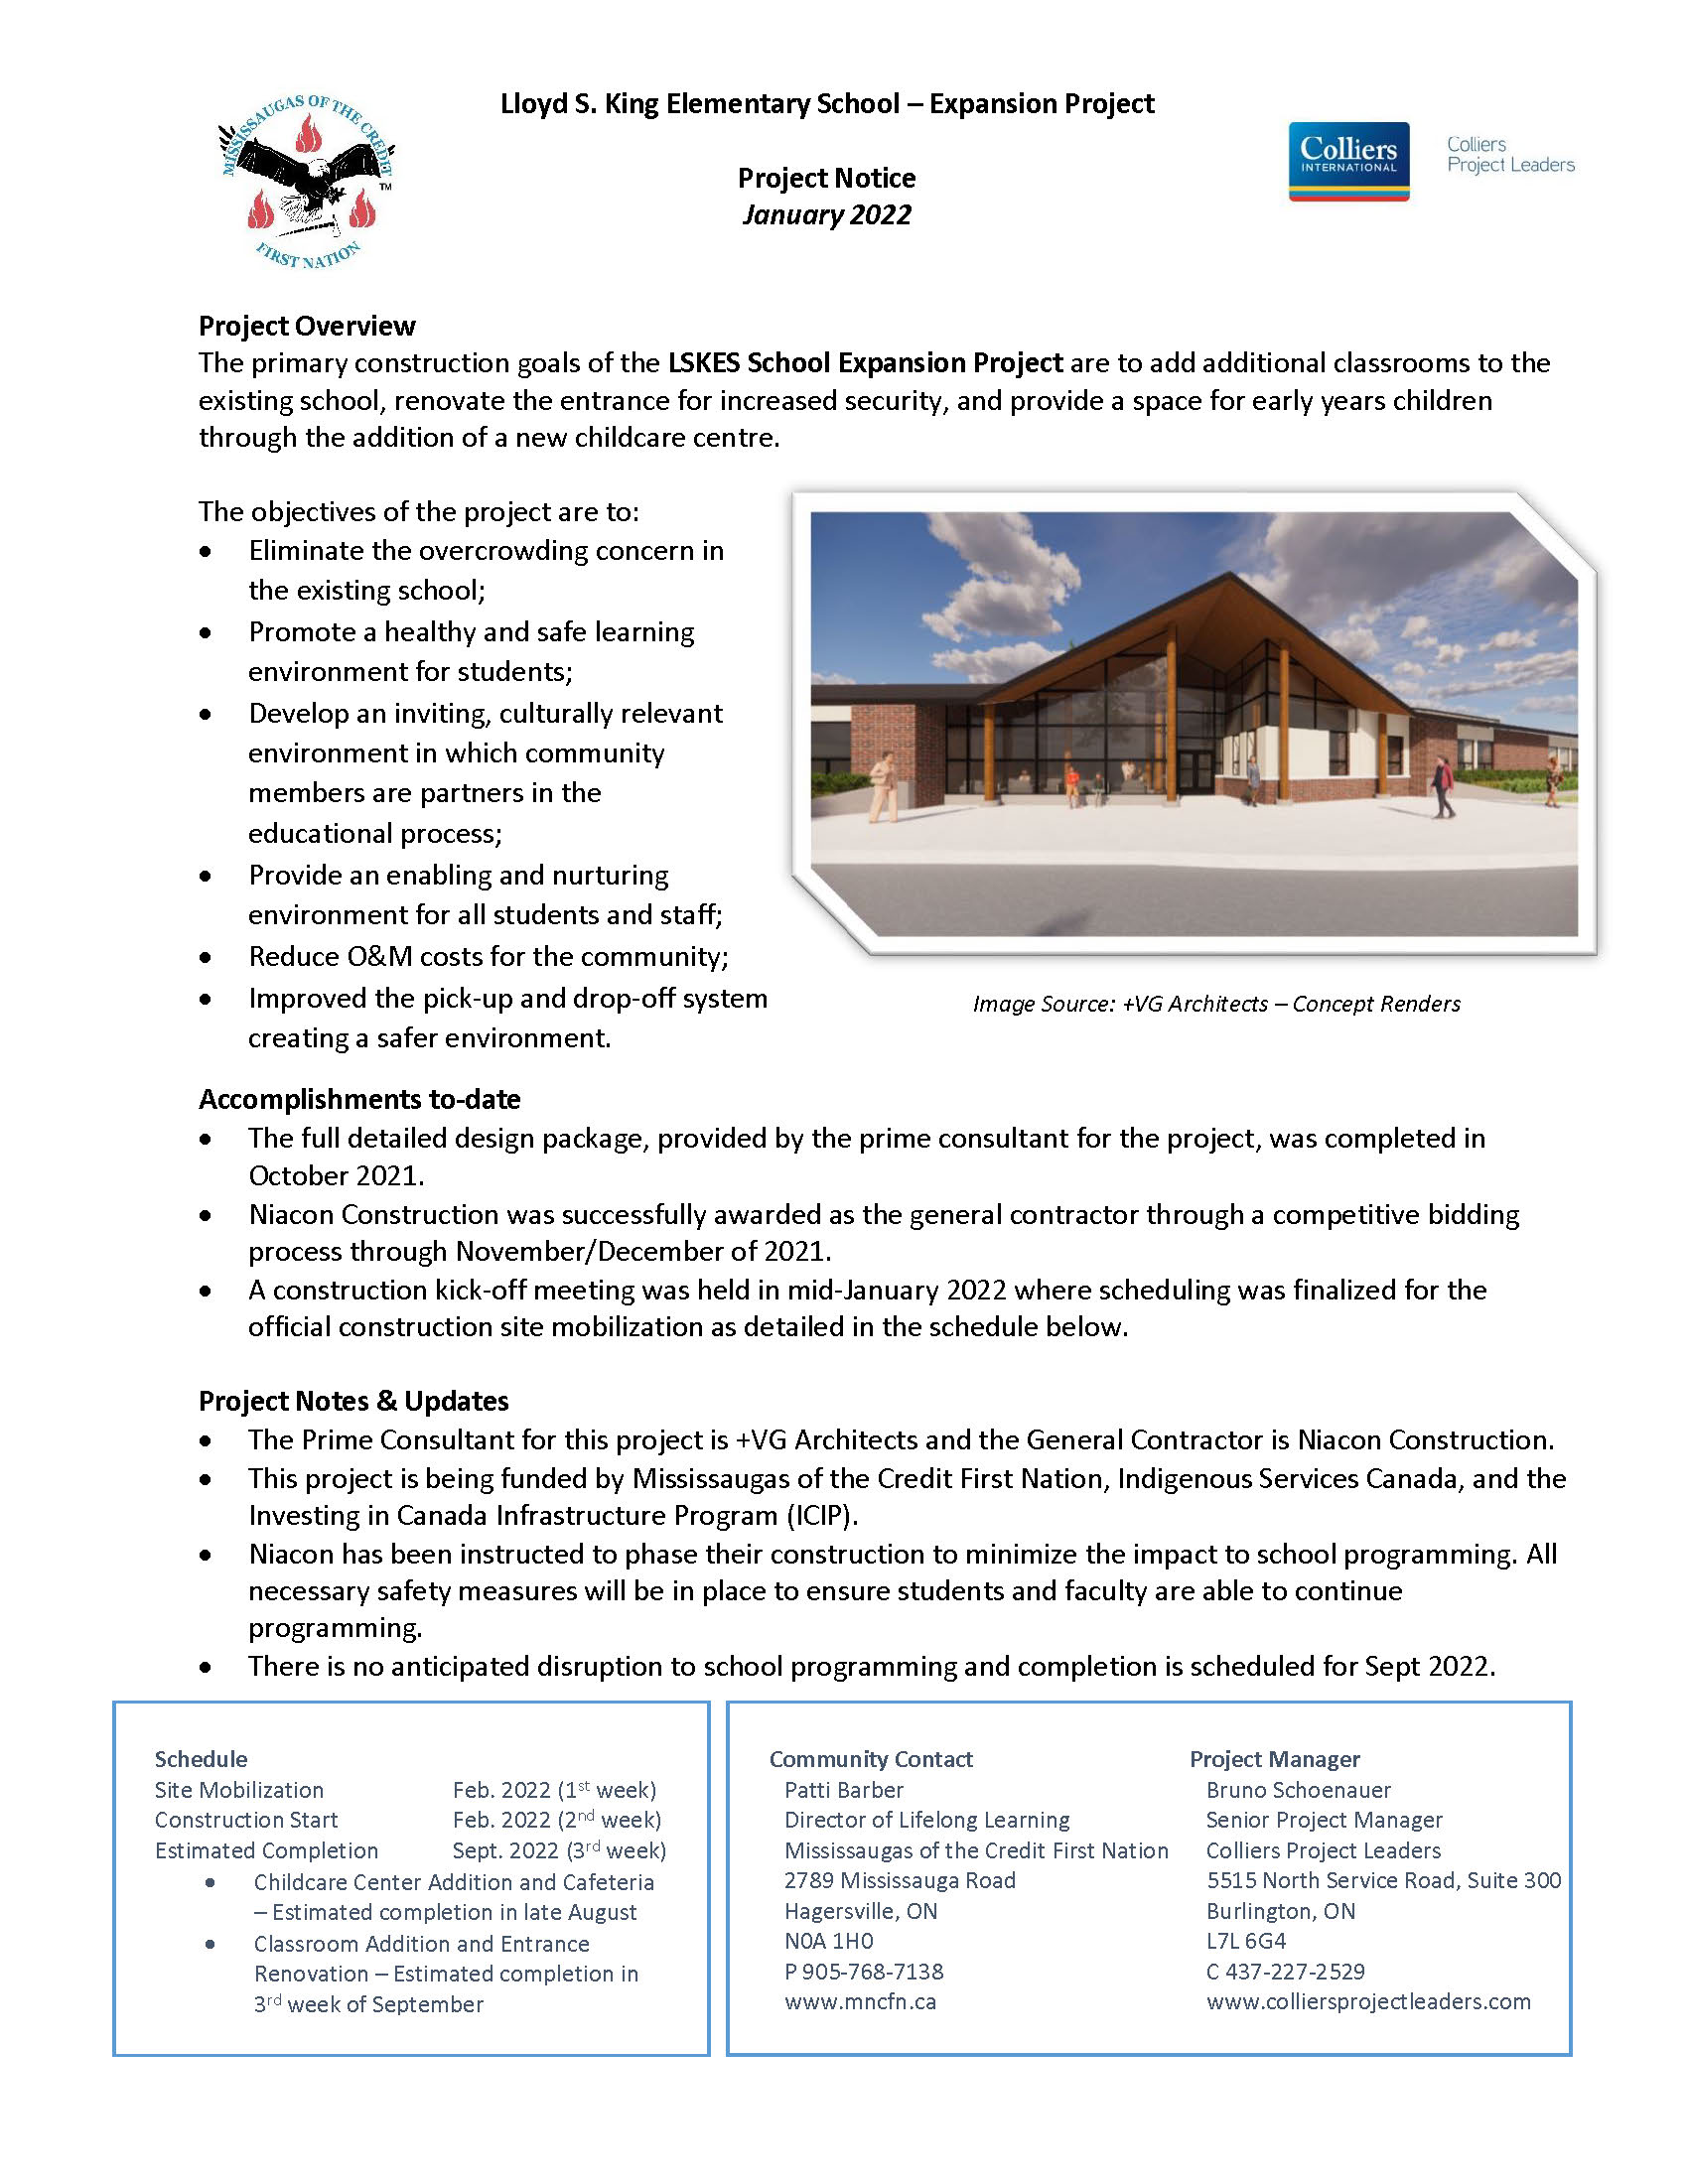 Lloyd S. King Elementary School – Expansion Project – Project Notice